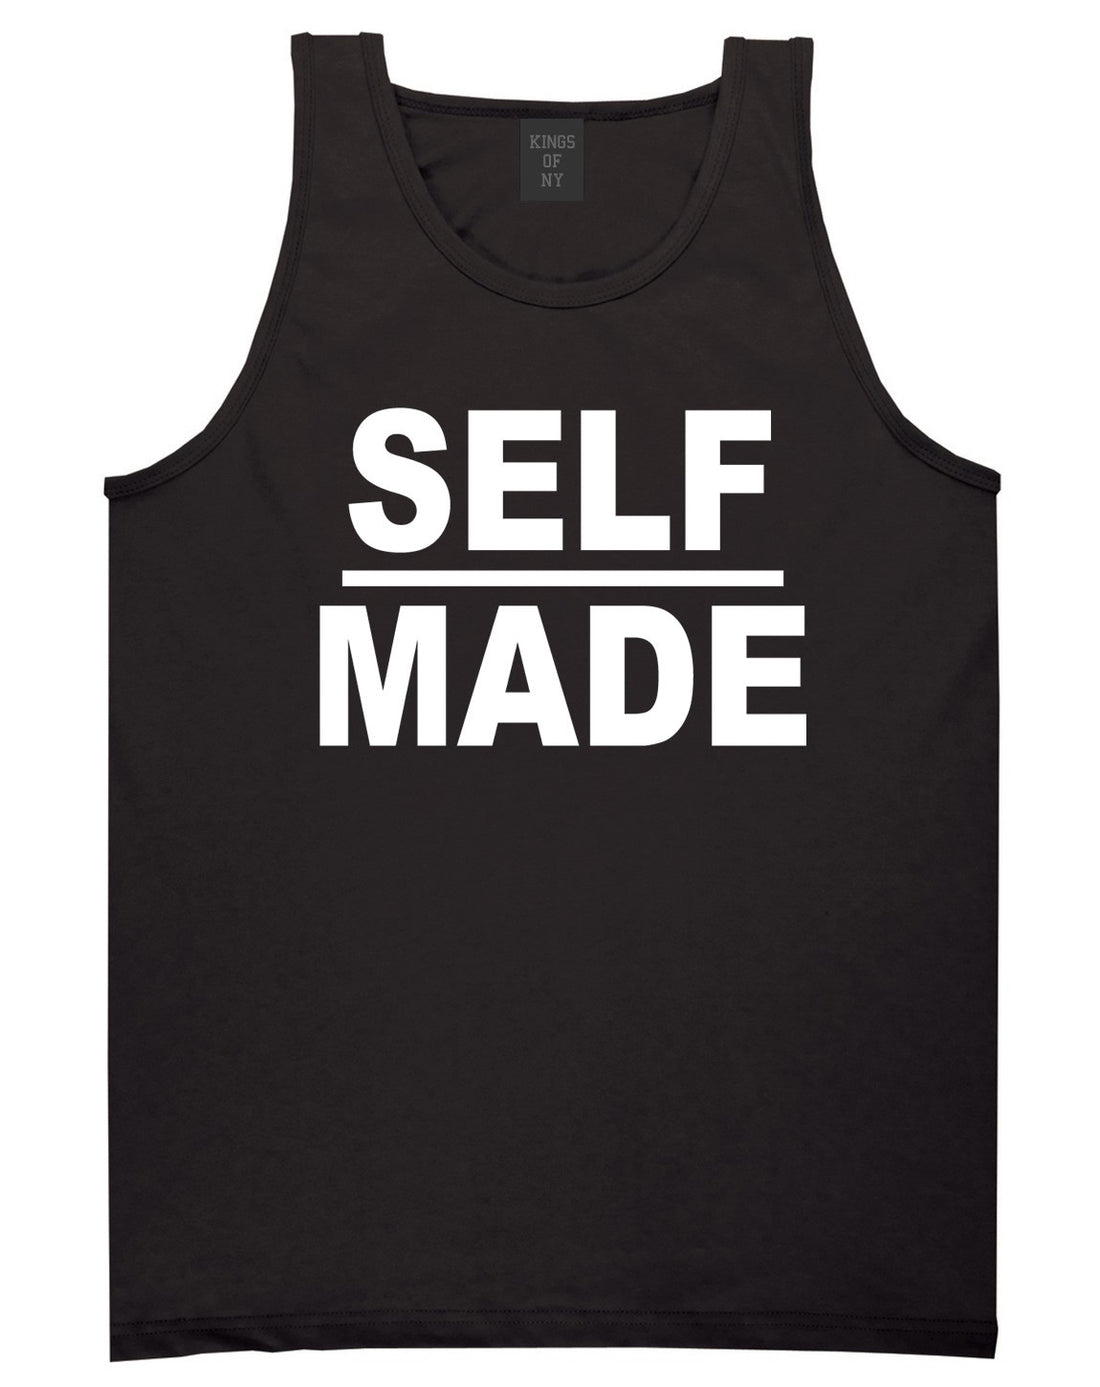 Kings Of NY Self Made Tank Top in Black